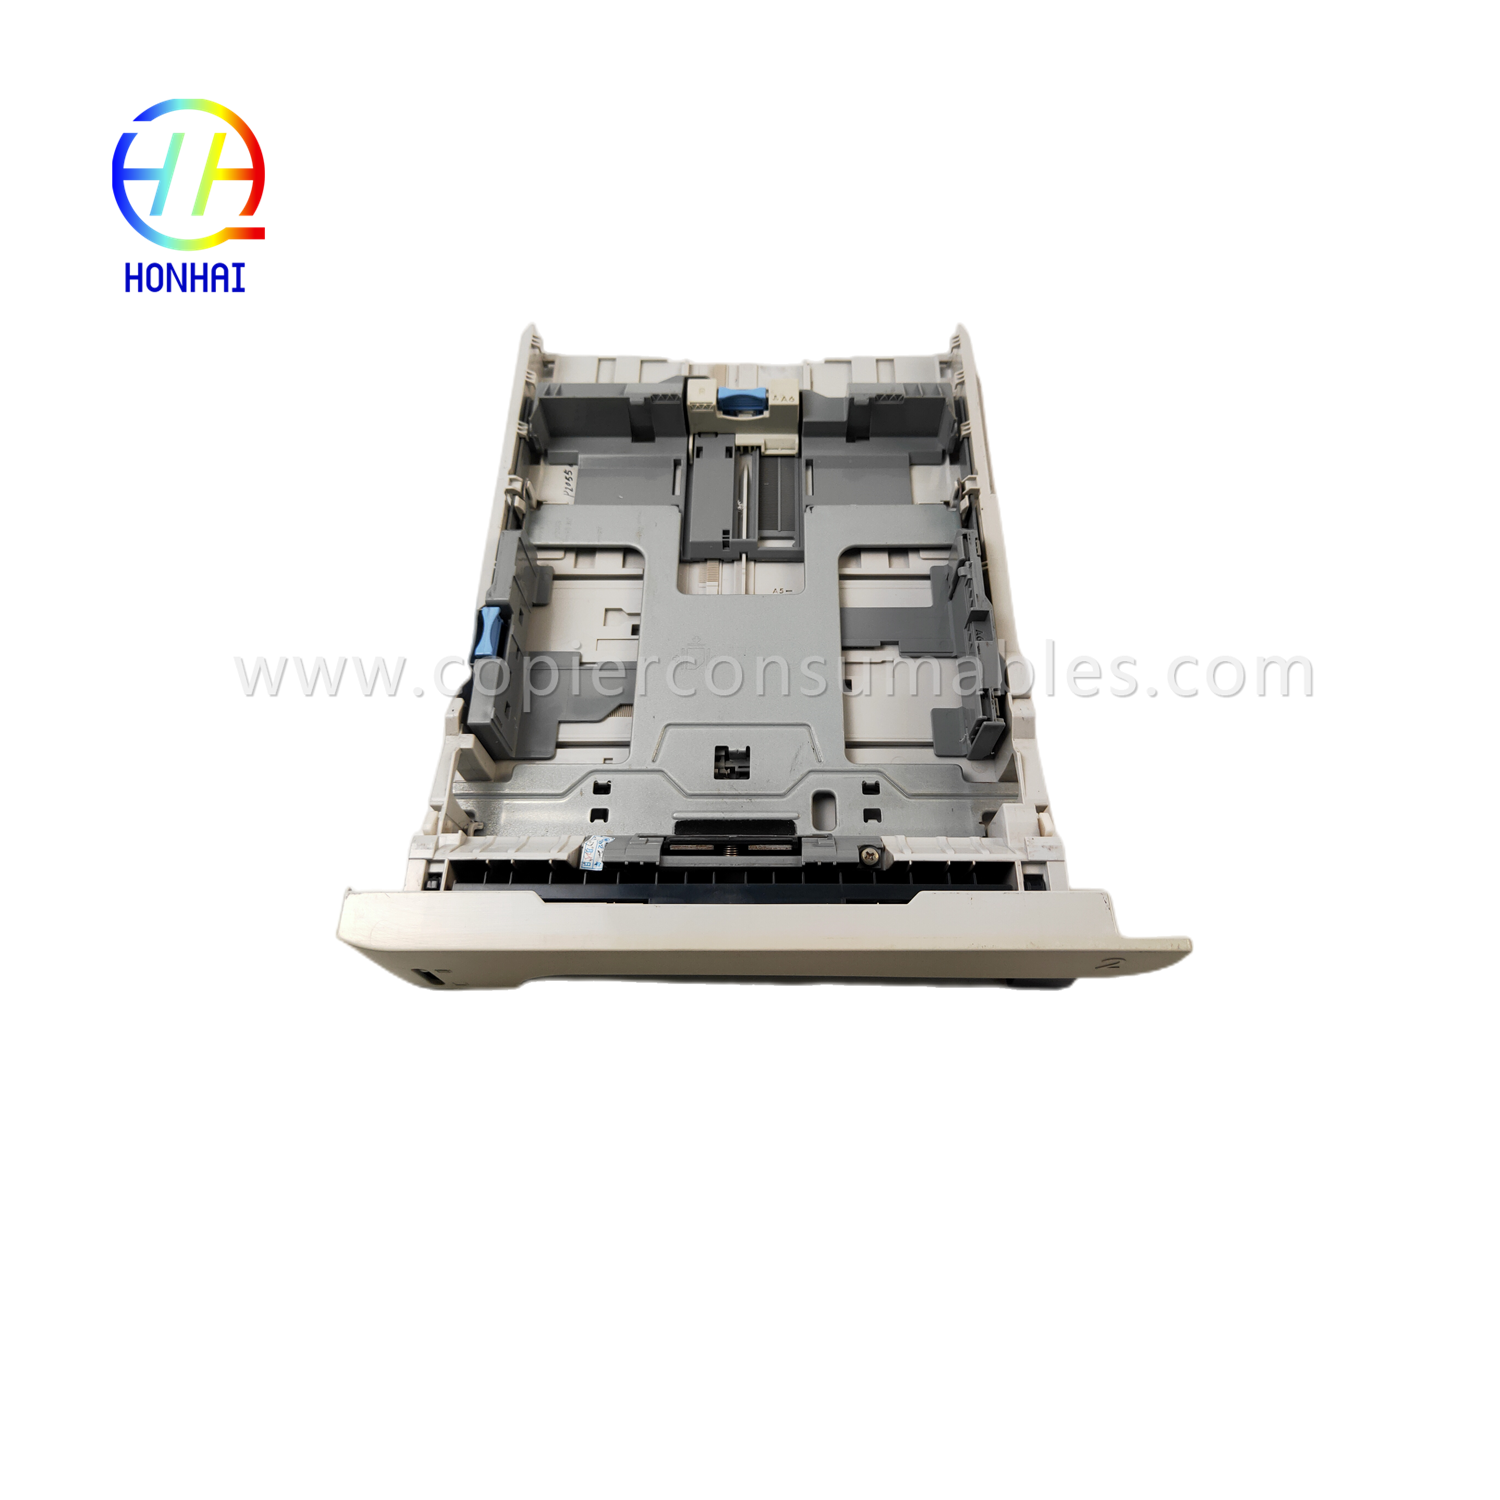 https://www.copierconsumables.com/paper-tray-assembly-for-xerox-phaser-3320dni-workcentre-3315dn-3325dni-050n00650-cassette-paper-tray-product/